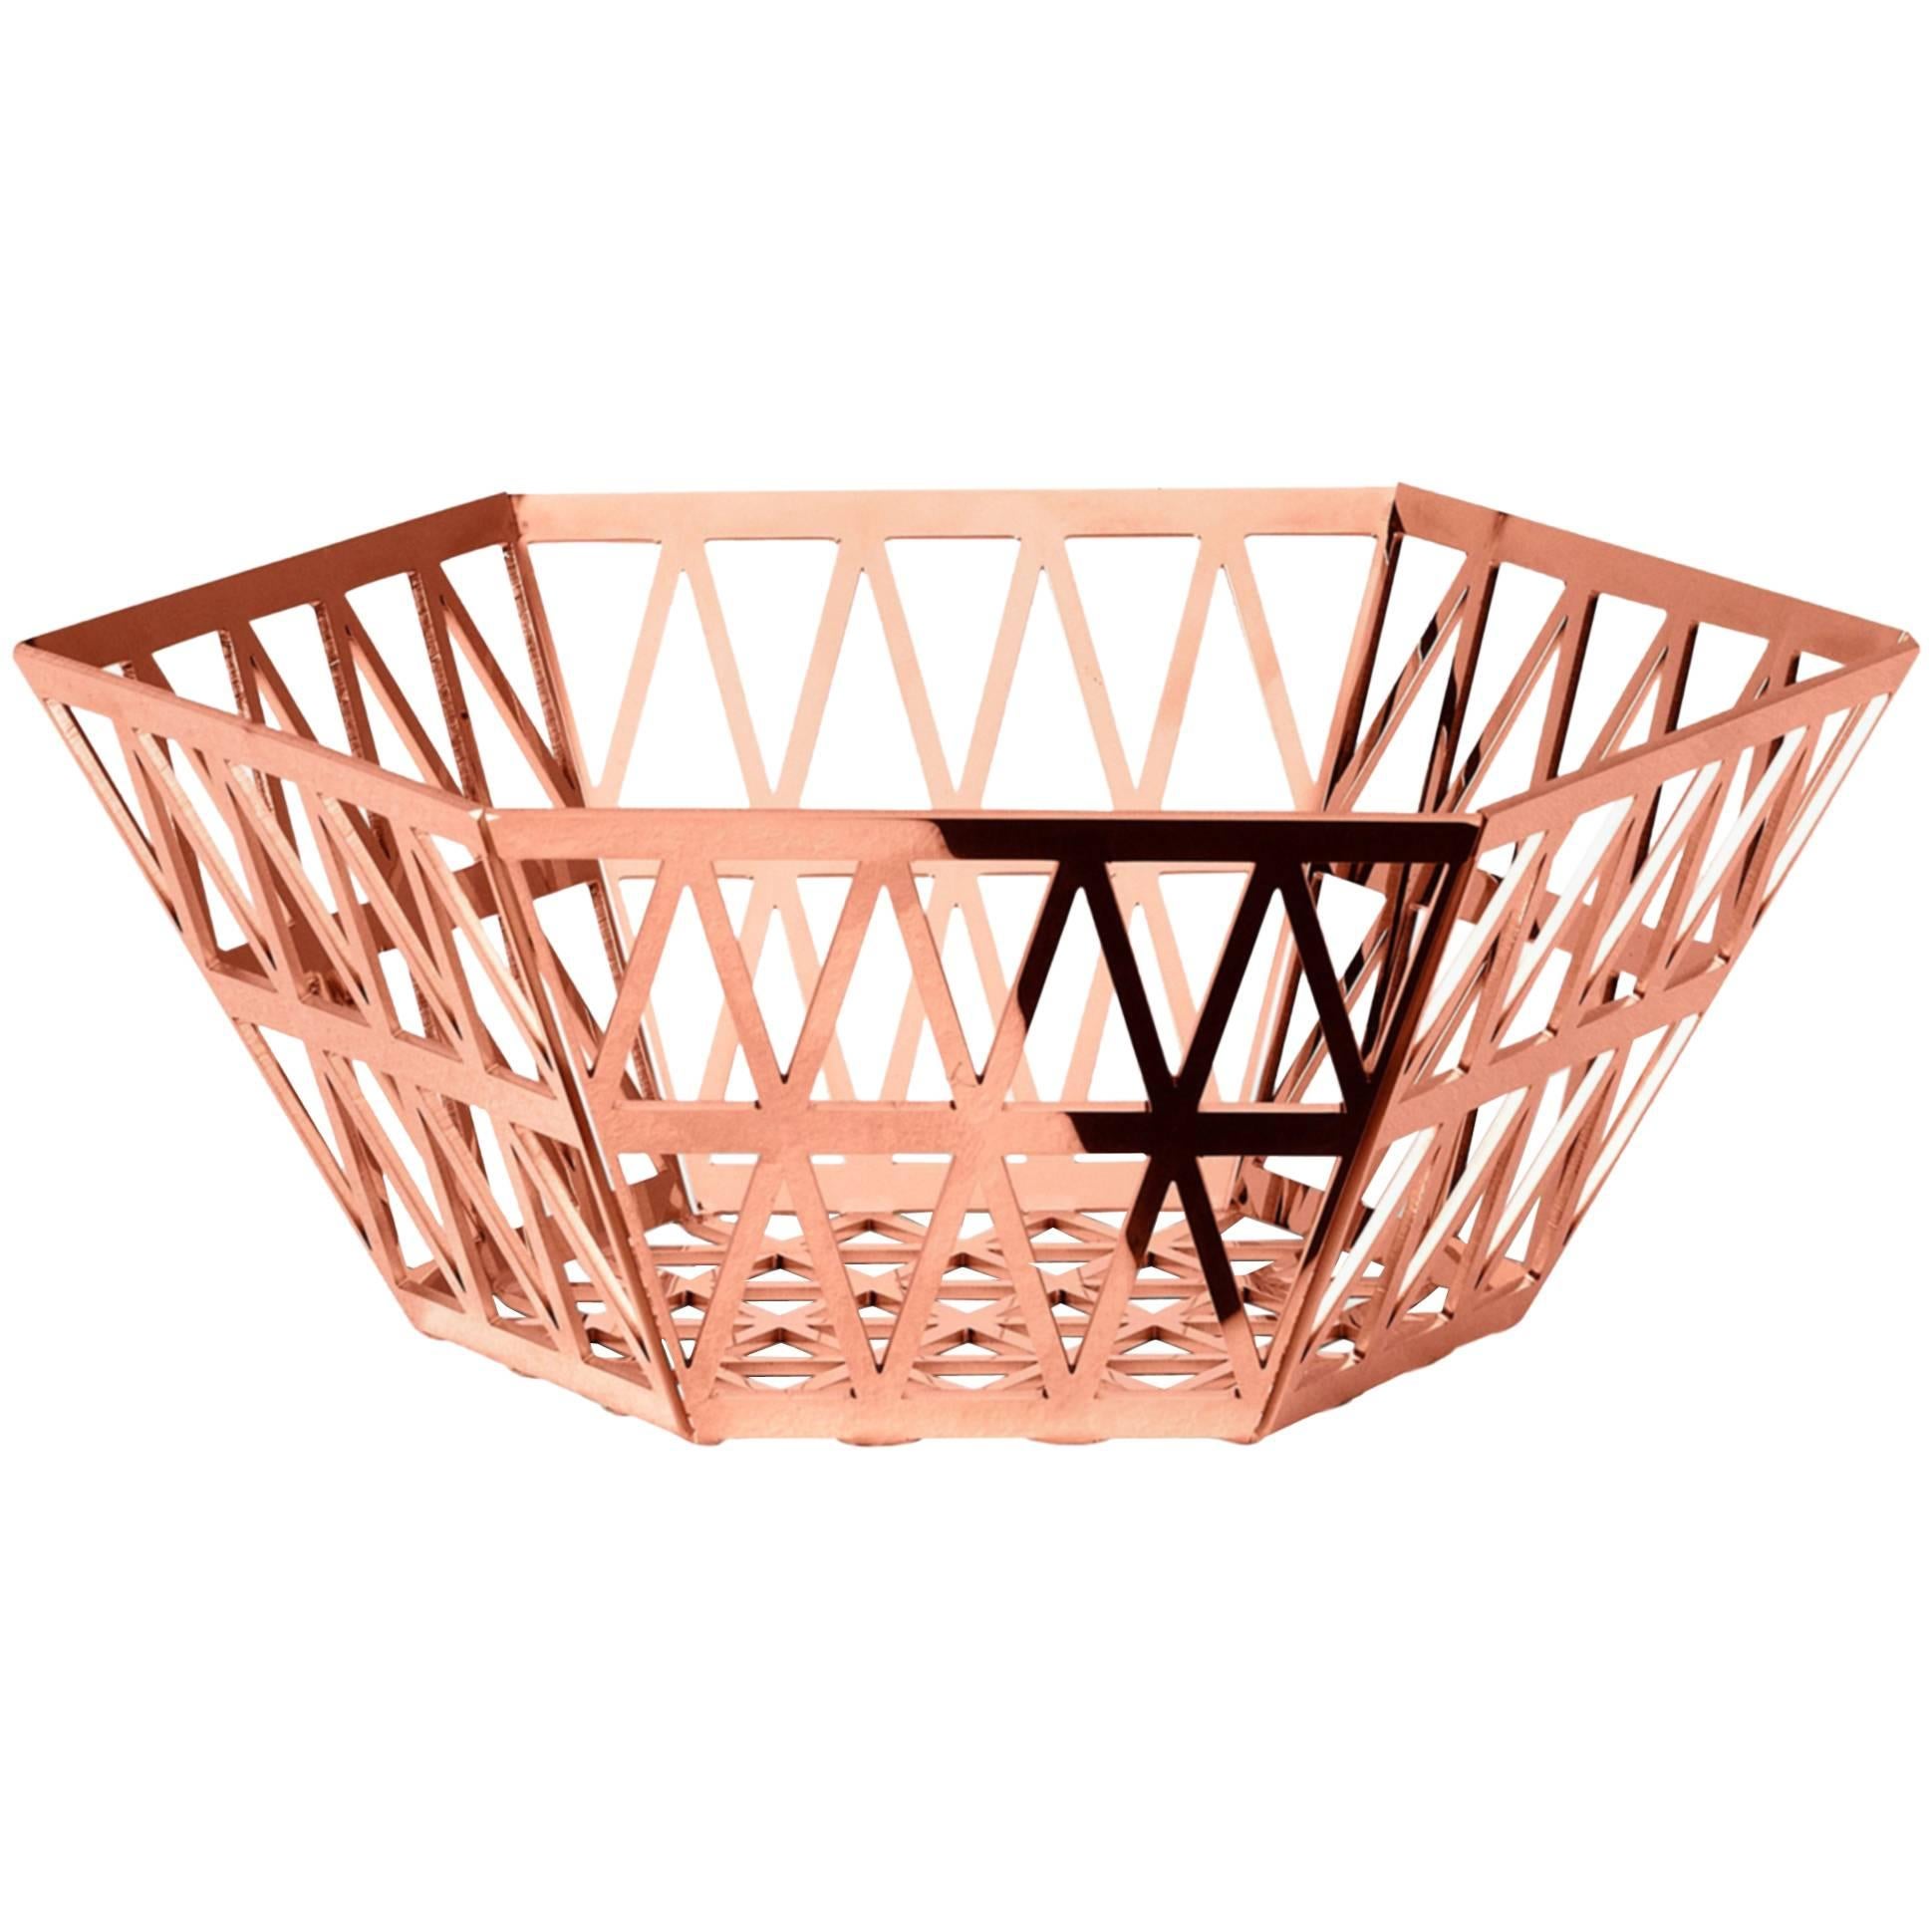 Ghidini 1961 Tip Top Tall Tray in Rose Gold Finish